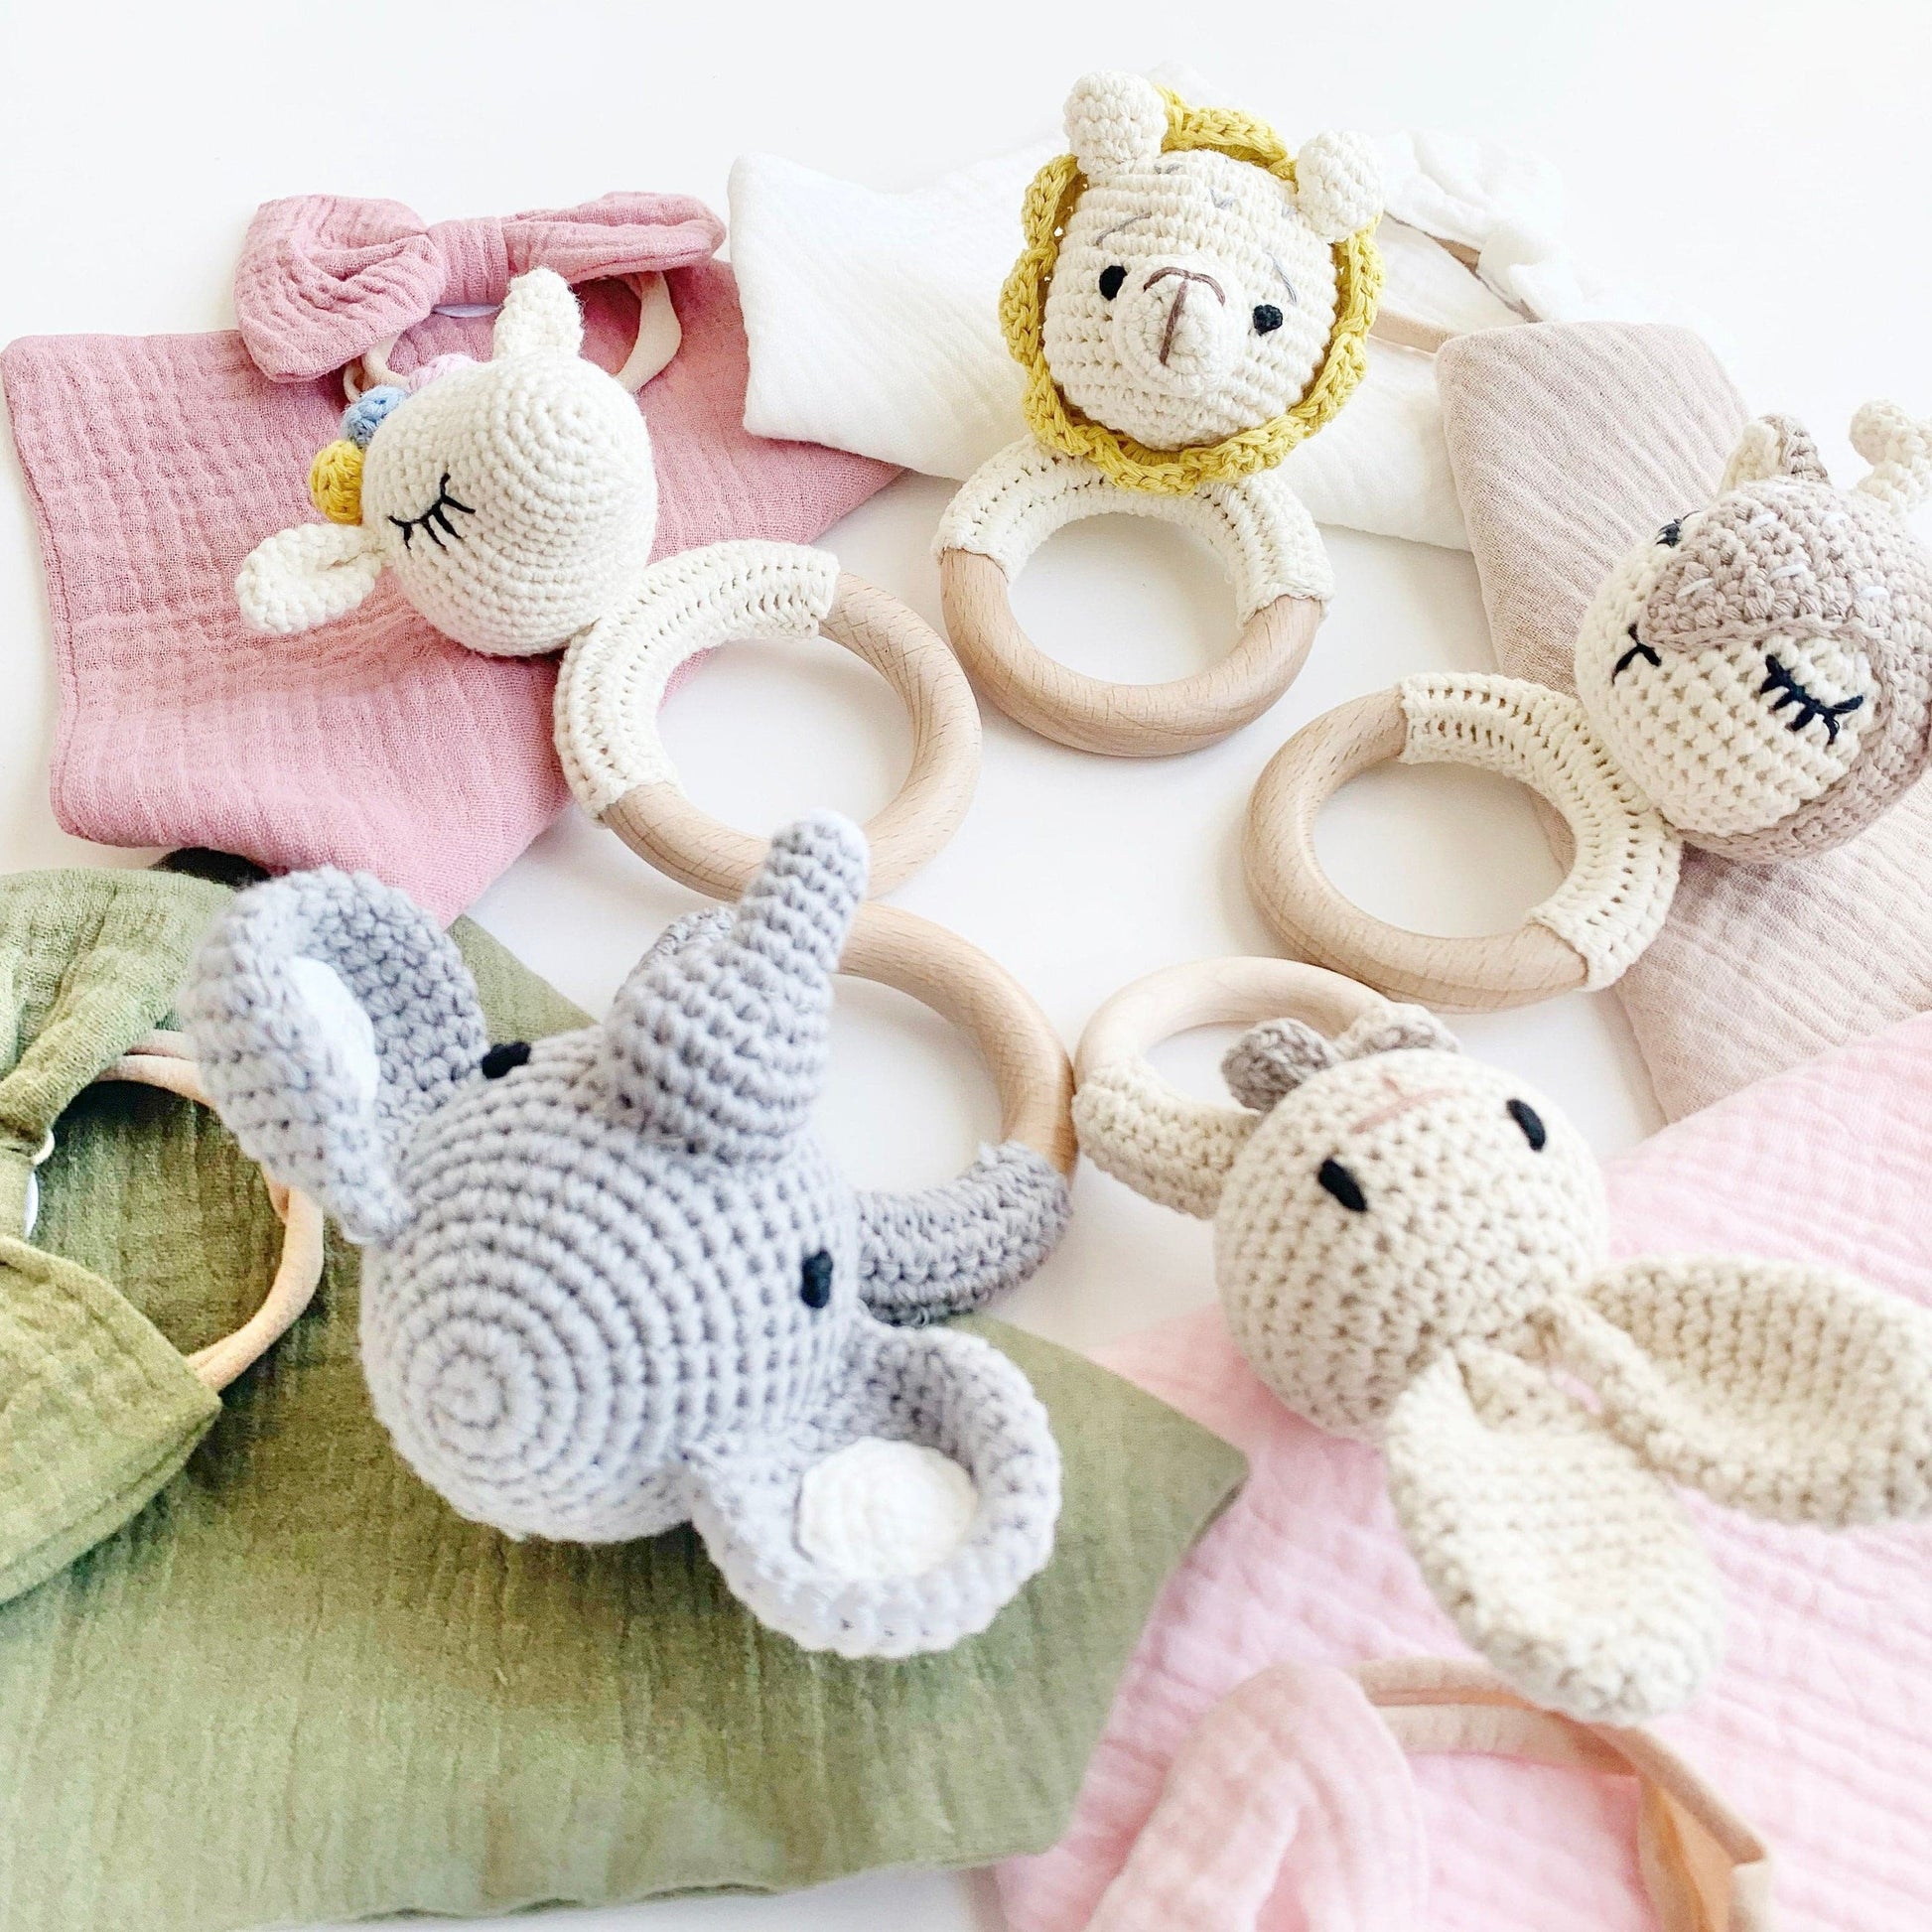 Baby Bib and Bow Gift - Matching Baby Bow and Rattle